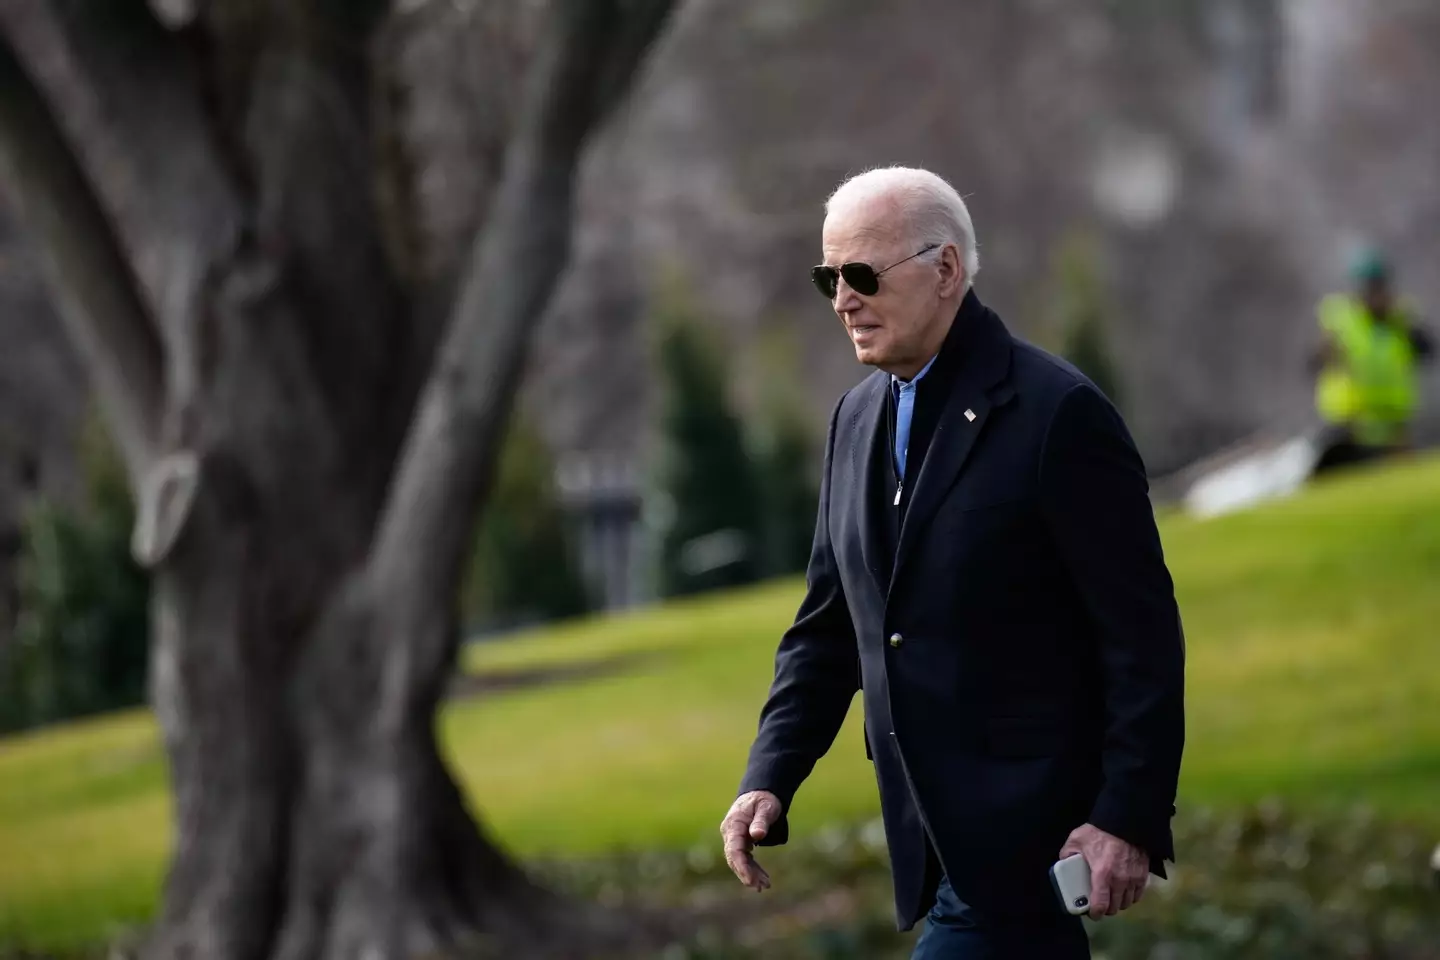 Joe Biden was not at The White House at the time.